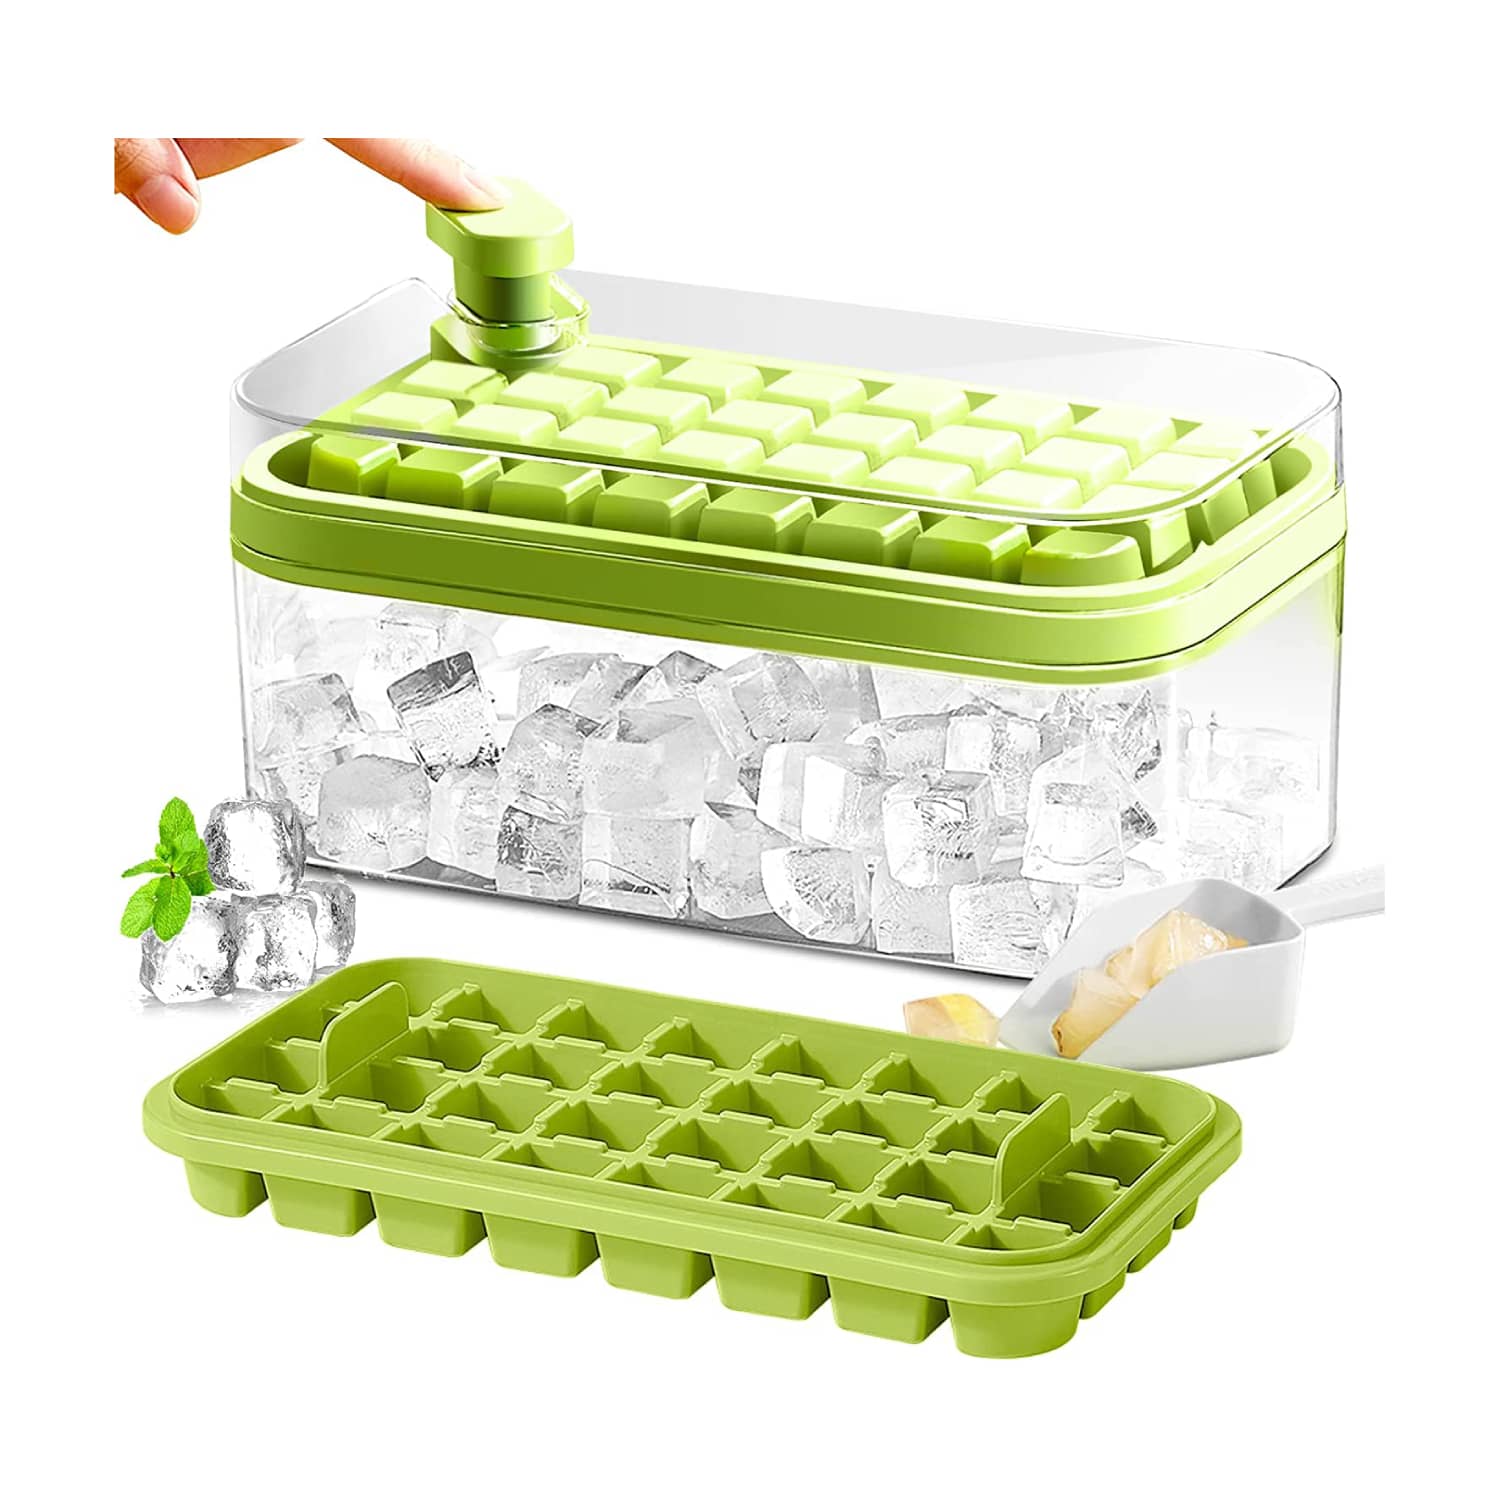 Cleaning ice cube trays is one cool solution – Our Communities